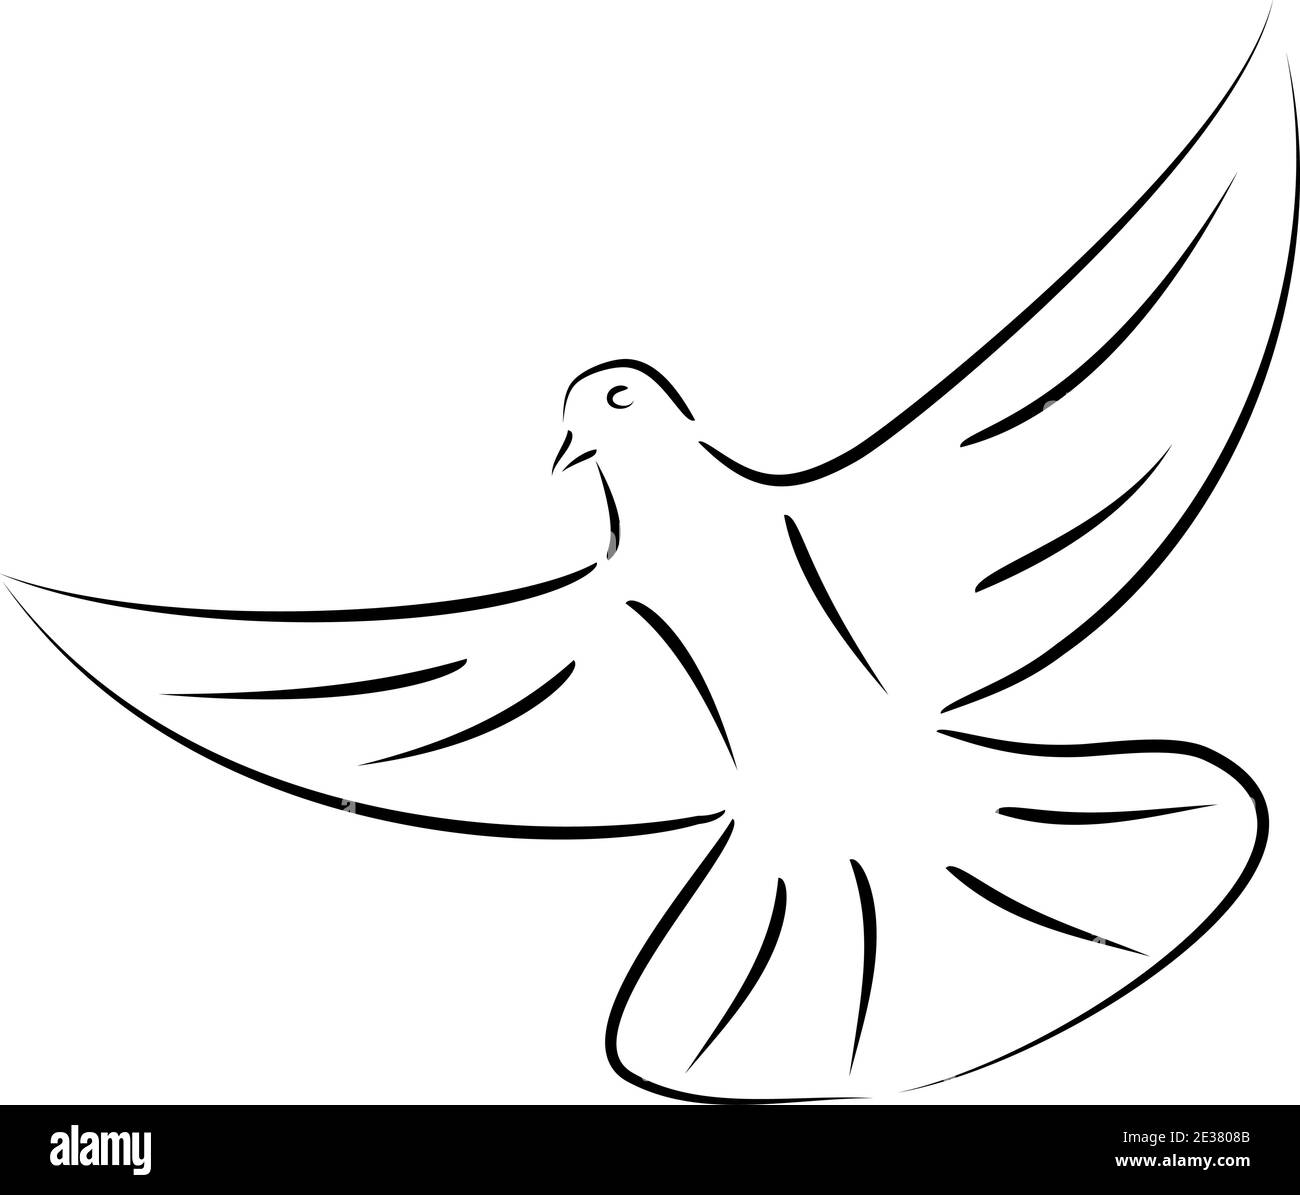 White dove in flight movement Stock Vector Images - Alamy